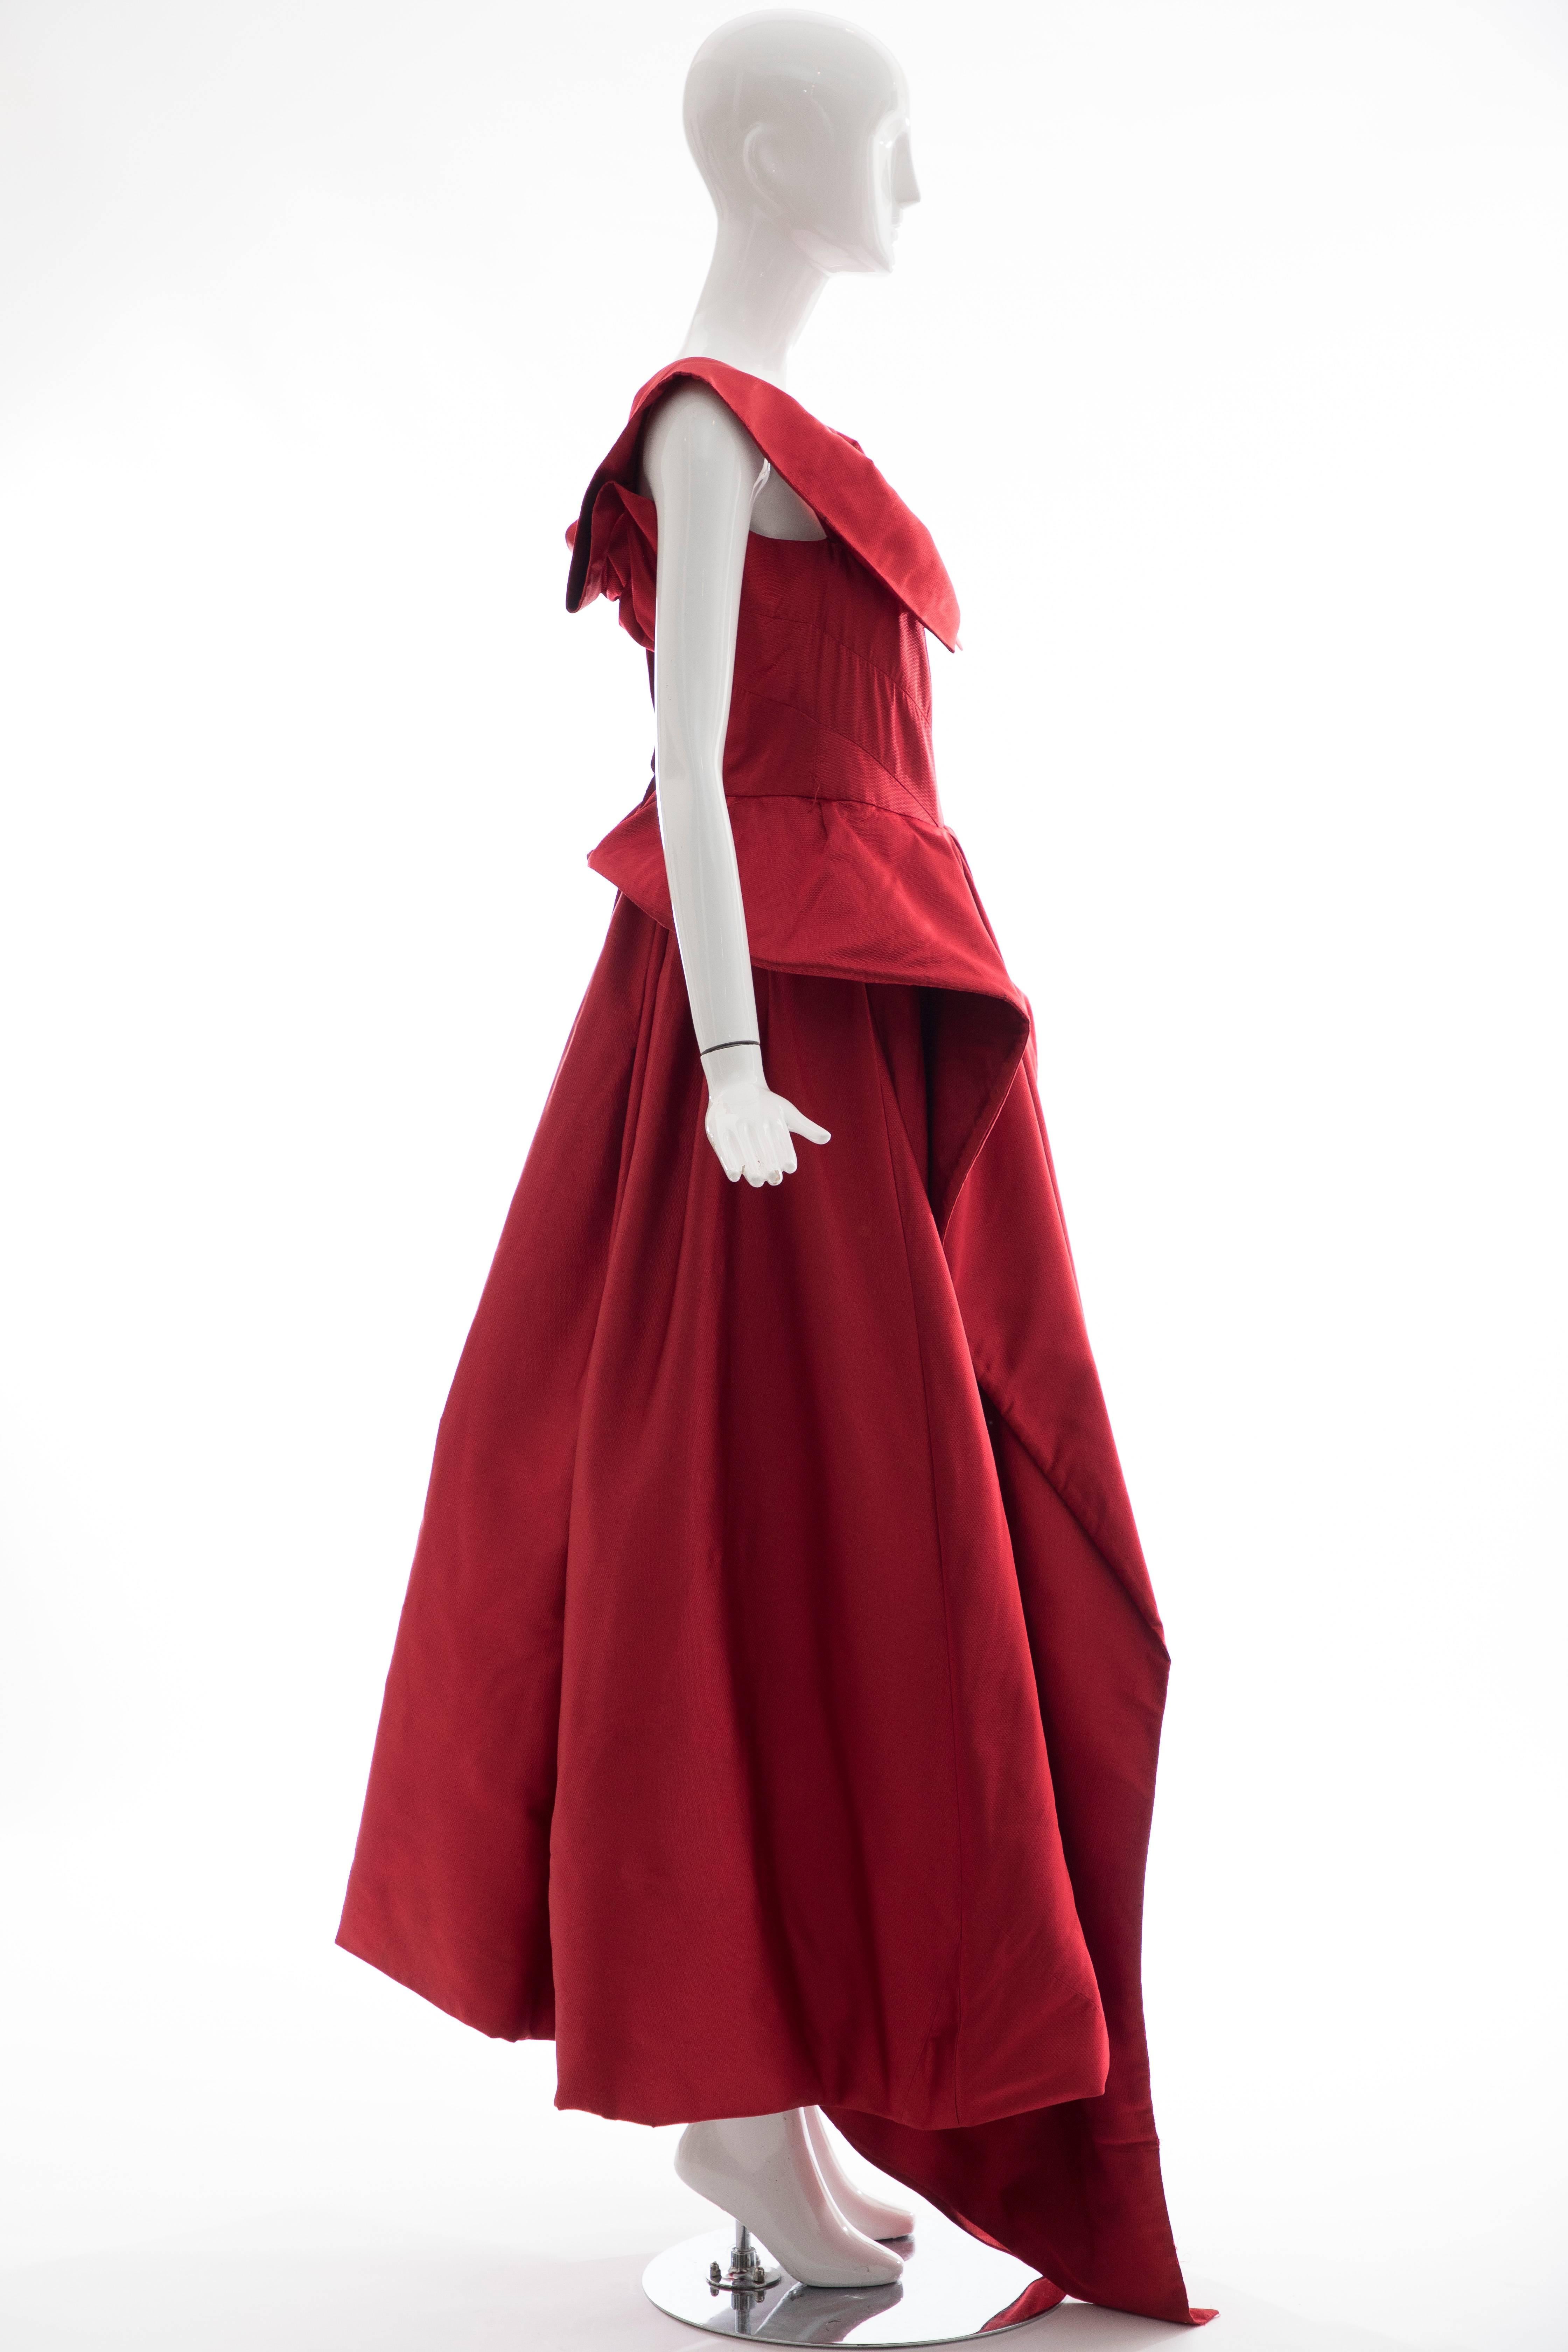 Red Christian Dior New York Demi Couture Silk Scarlet Evening Dress, Circa 1950s